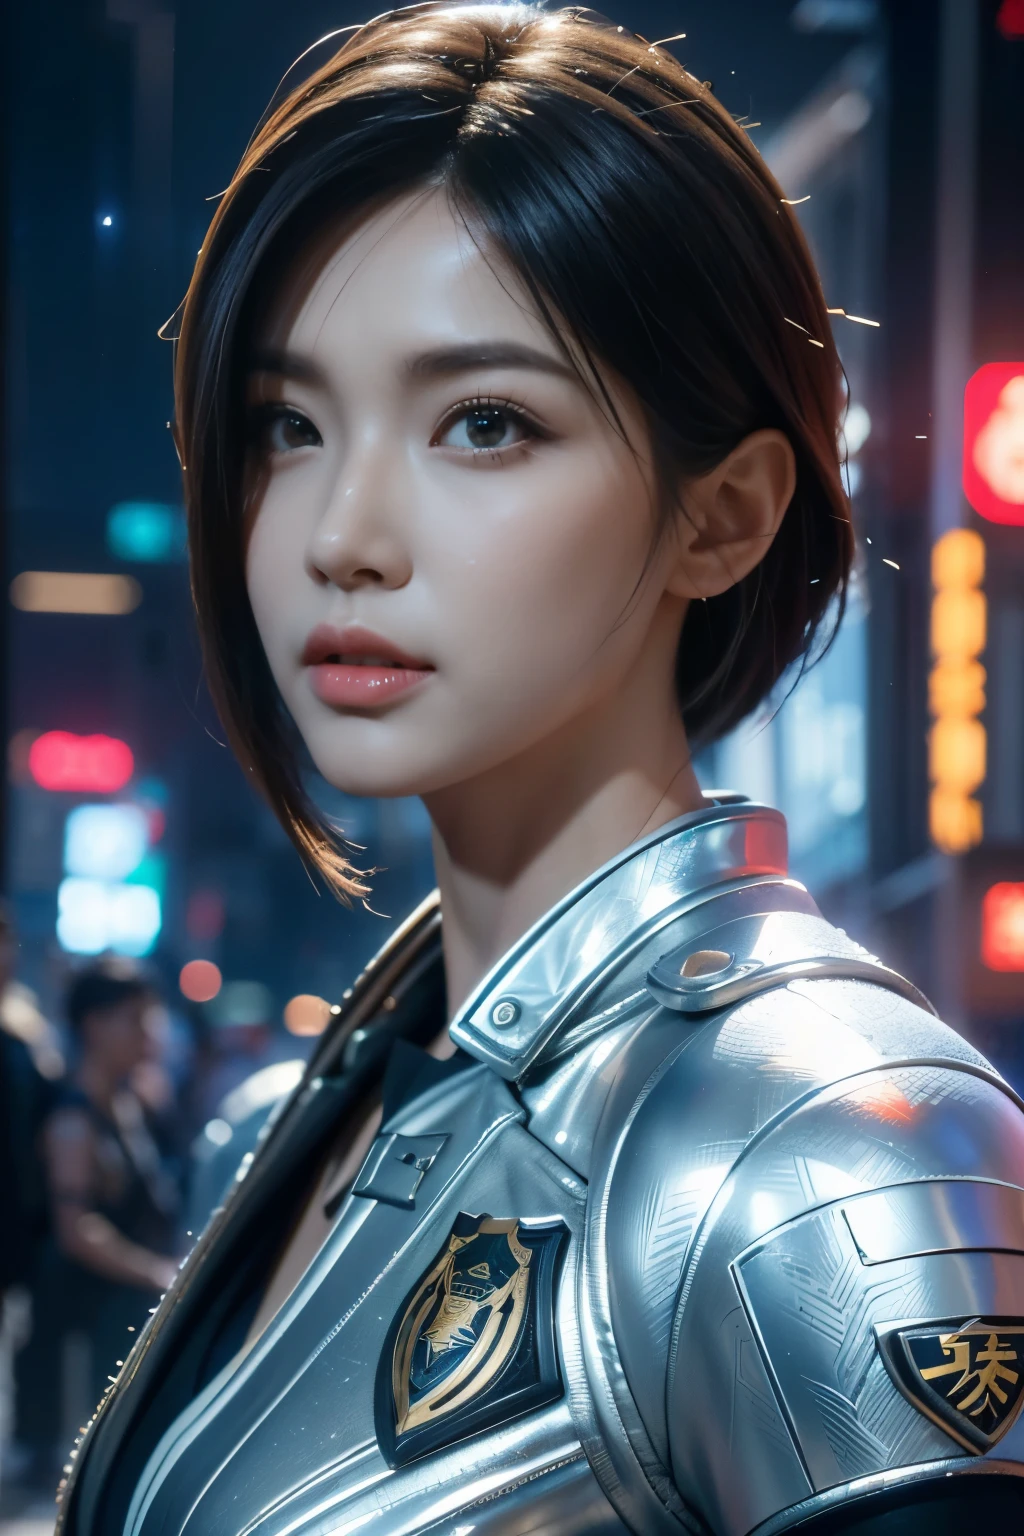 Game art，The best picture quality，Highest resolution，8K，((A bust photograph))，((Portrait))，(Rule of thirds)，Unreal Engine 5 rendering works， (The Girl of the Future)，(Female Warrior)， 22-year-old girl，(Female hackers)，(White short hair，Long hair casual)，(A beautiful eye full of detail)，(Big breasts)，(Eye shadow)，Elegant and charming，indifferent，((surprise))，(Battle wear full of futuristic tech，Clothing combines futuristic power armor and police uniforms，The garments are adorned with glittering patterns and badges)，Cyberpunk Characters，Future Style， Photo poses，City background，Movie lights，Ray tracing，Game CG，((3D Unreal Engine))，oc rendering reflection pattern